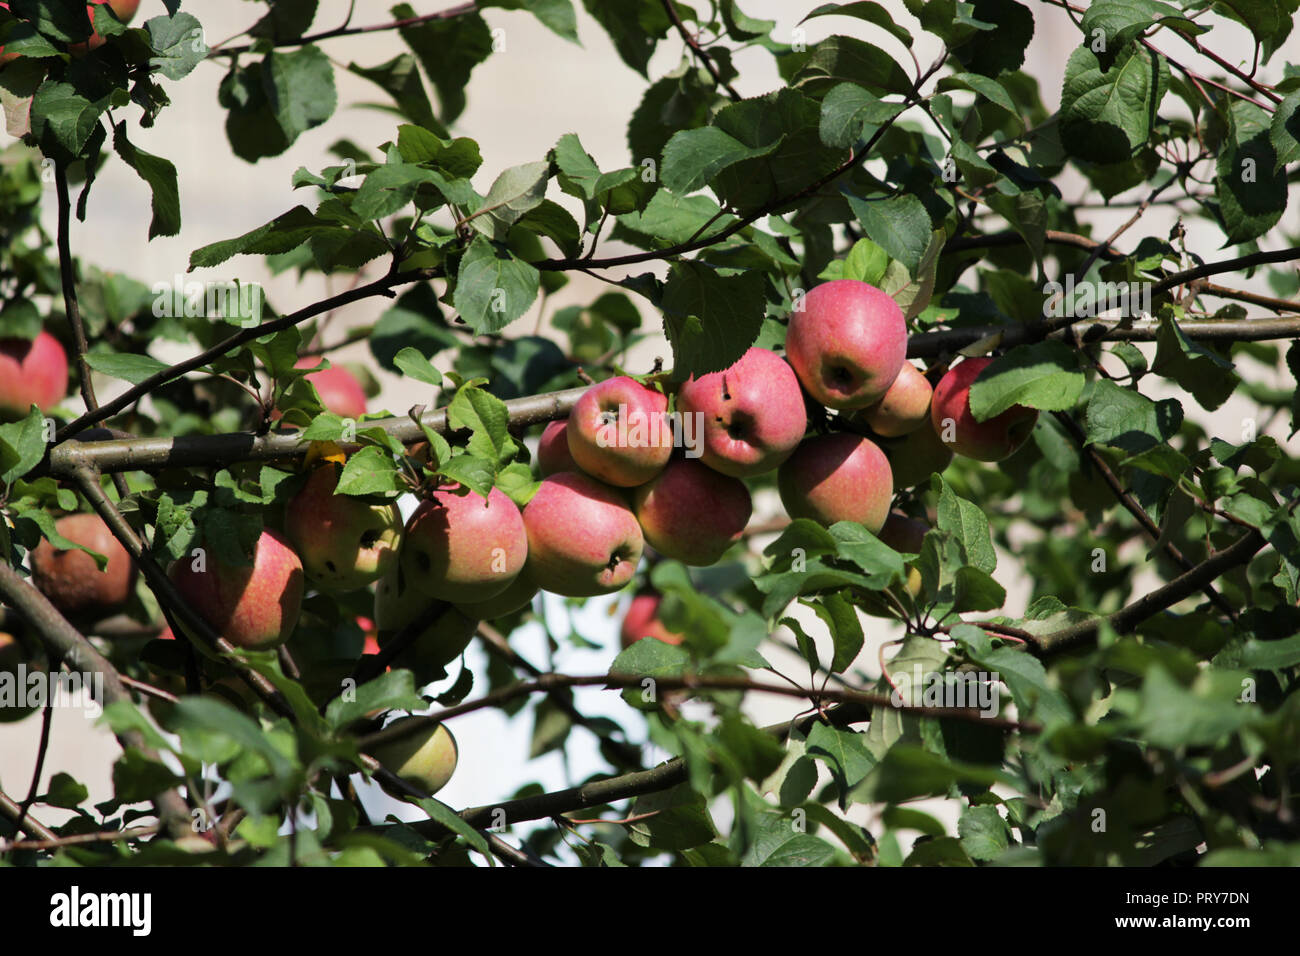 Fruits of apple on a tree, one of which is damaged and Infected by the penetration of the larva into the fruits Stock Photo